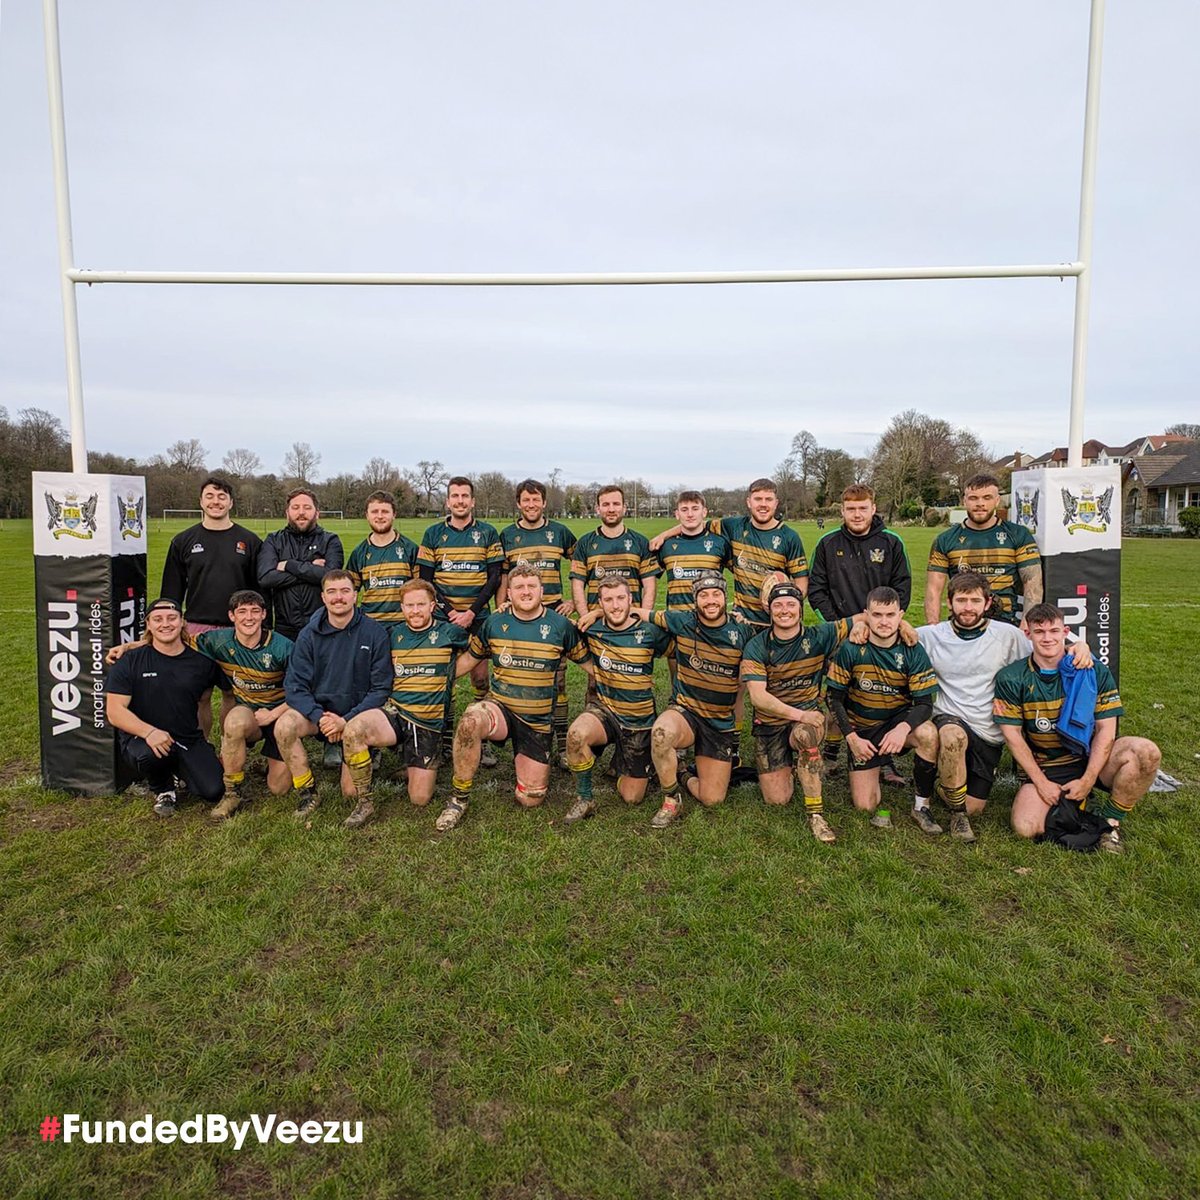 We’re delighted to support @bridgendathrfc by donating rugby post protectors for the club through our Funded by Veezu programme ✨

Got a local initiative that needs funding support? Apply here👇
veezu.co.uk/funded-by-veezu

#smarterlocalrides #community #supportlocal #fundedbyveezu